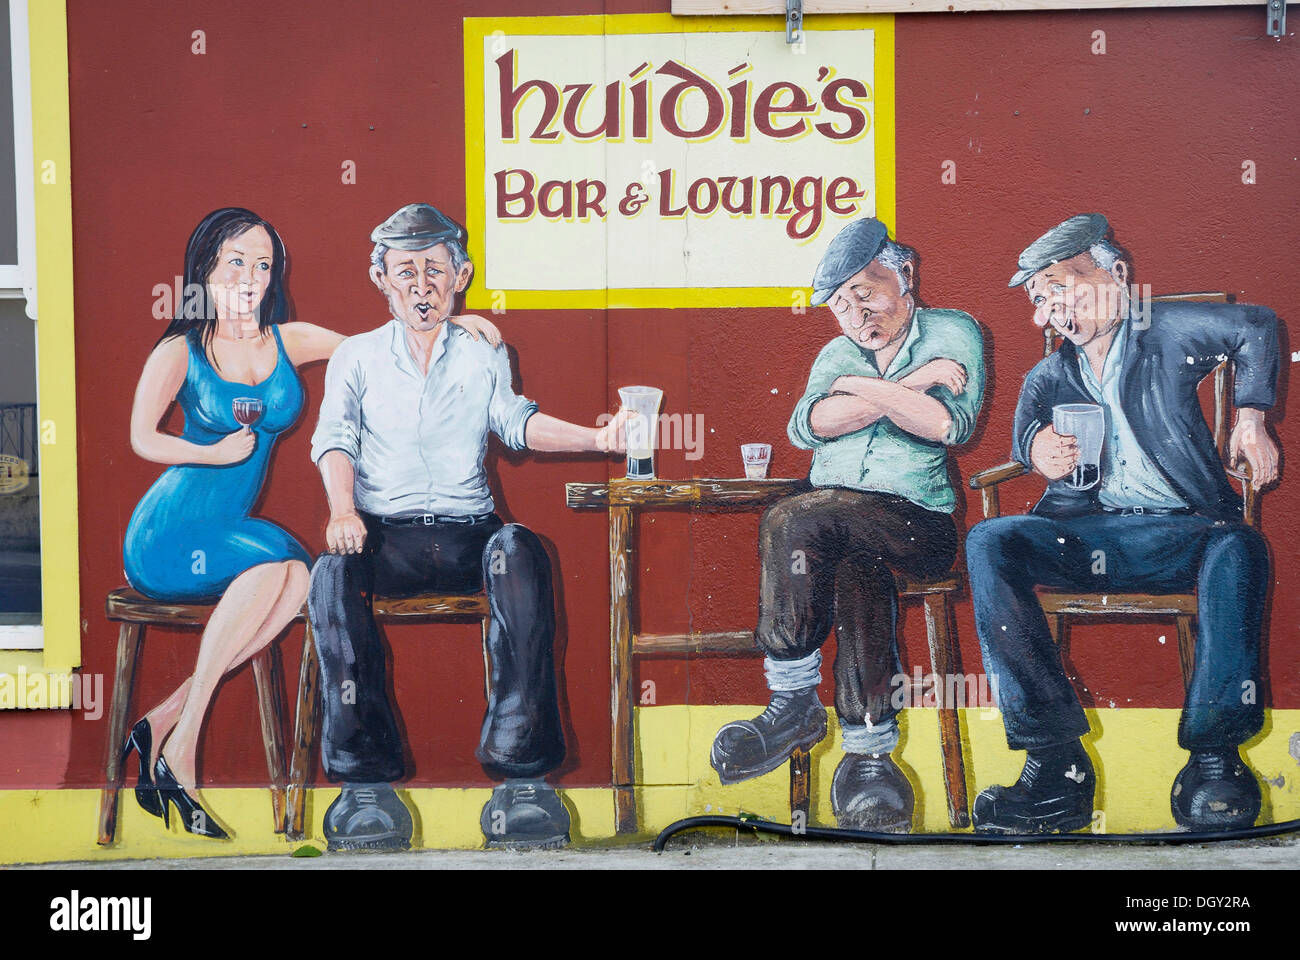 Huidi's Bar and Lounge, wall painting at a pub, Ruthmullan, County Donegal, Ireland, Europe Stock Photo